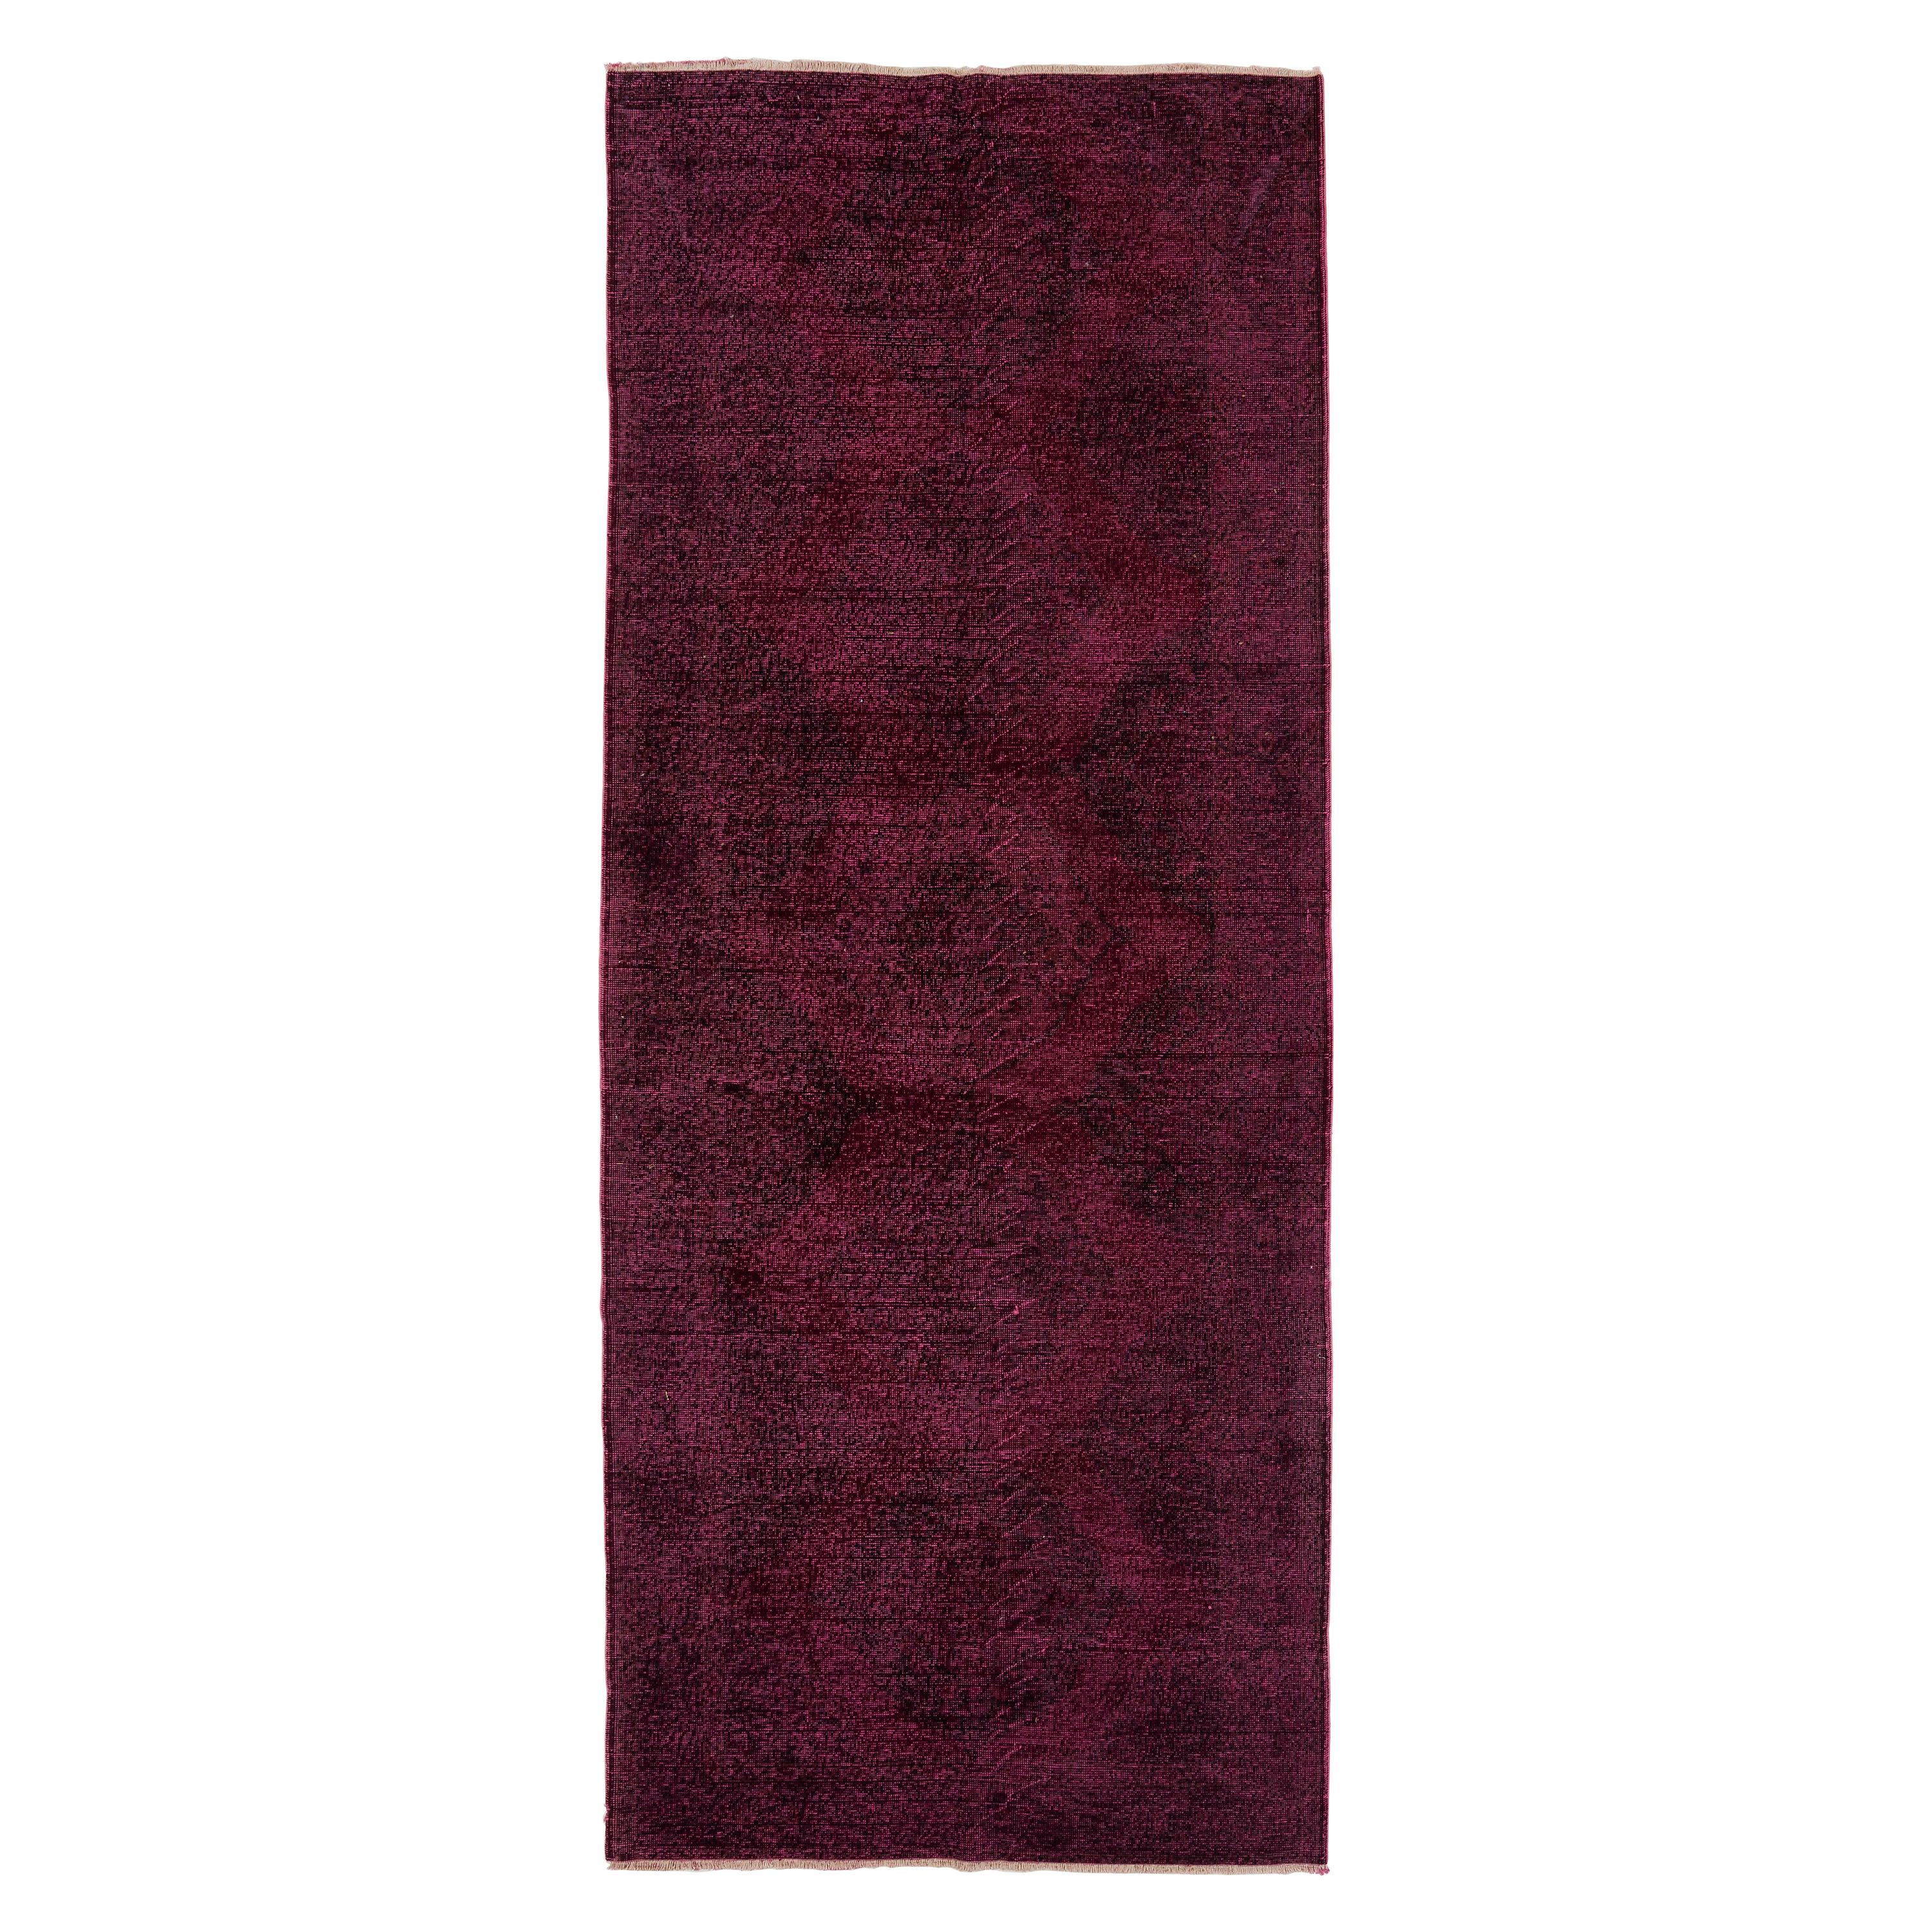 5x12.2 Ft Vintage Handmade Turkish Runner Rug Over-dyed in Maroon For Sale